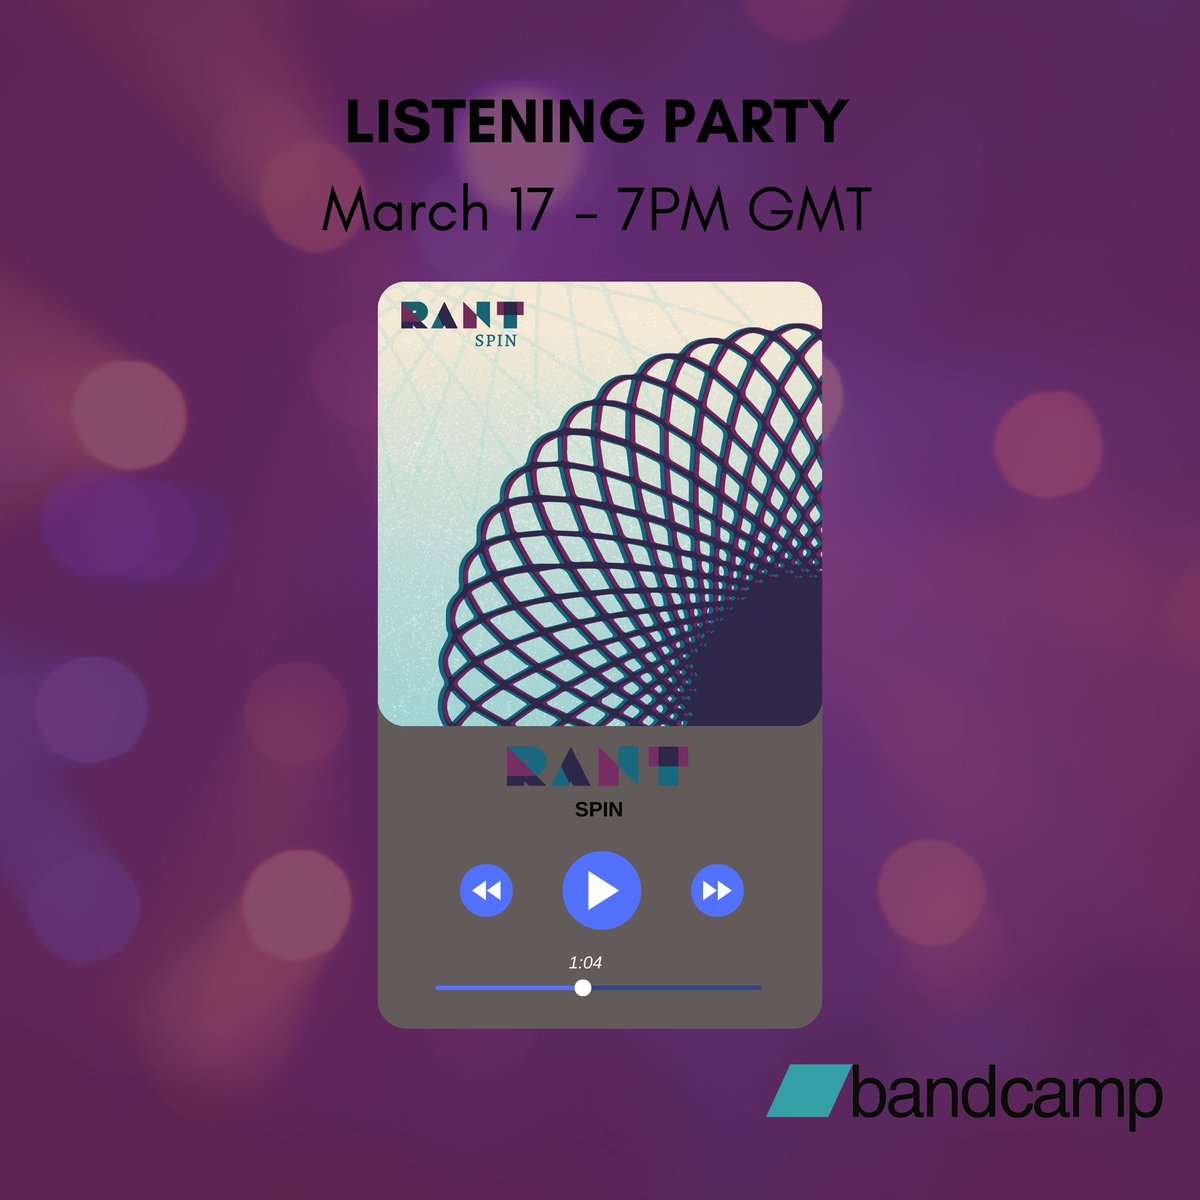 🎉 On Sunday 17 March, join us for a listen to Spin over @Bandcamp as we host a listening party 🎉 We’ll be online chatting through the inspiration behind the tracks + recording process. *90s clothes and beverages recommended but not compulsory* RSVP - rantfiddles.bandcamp.com